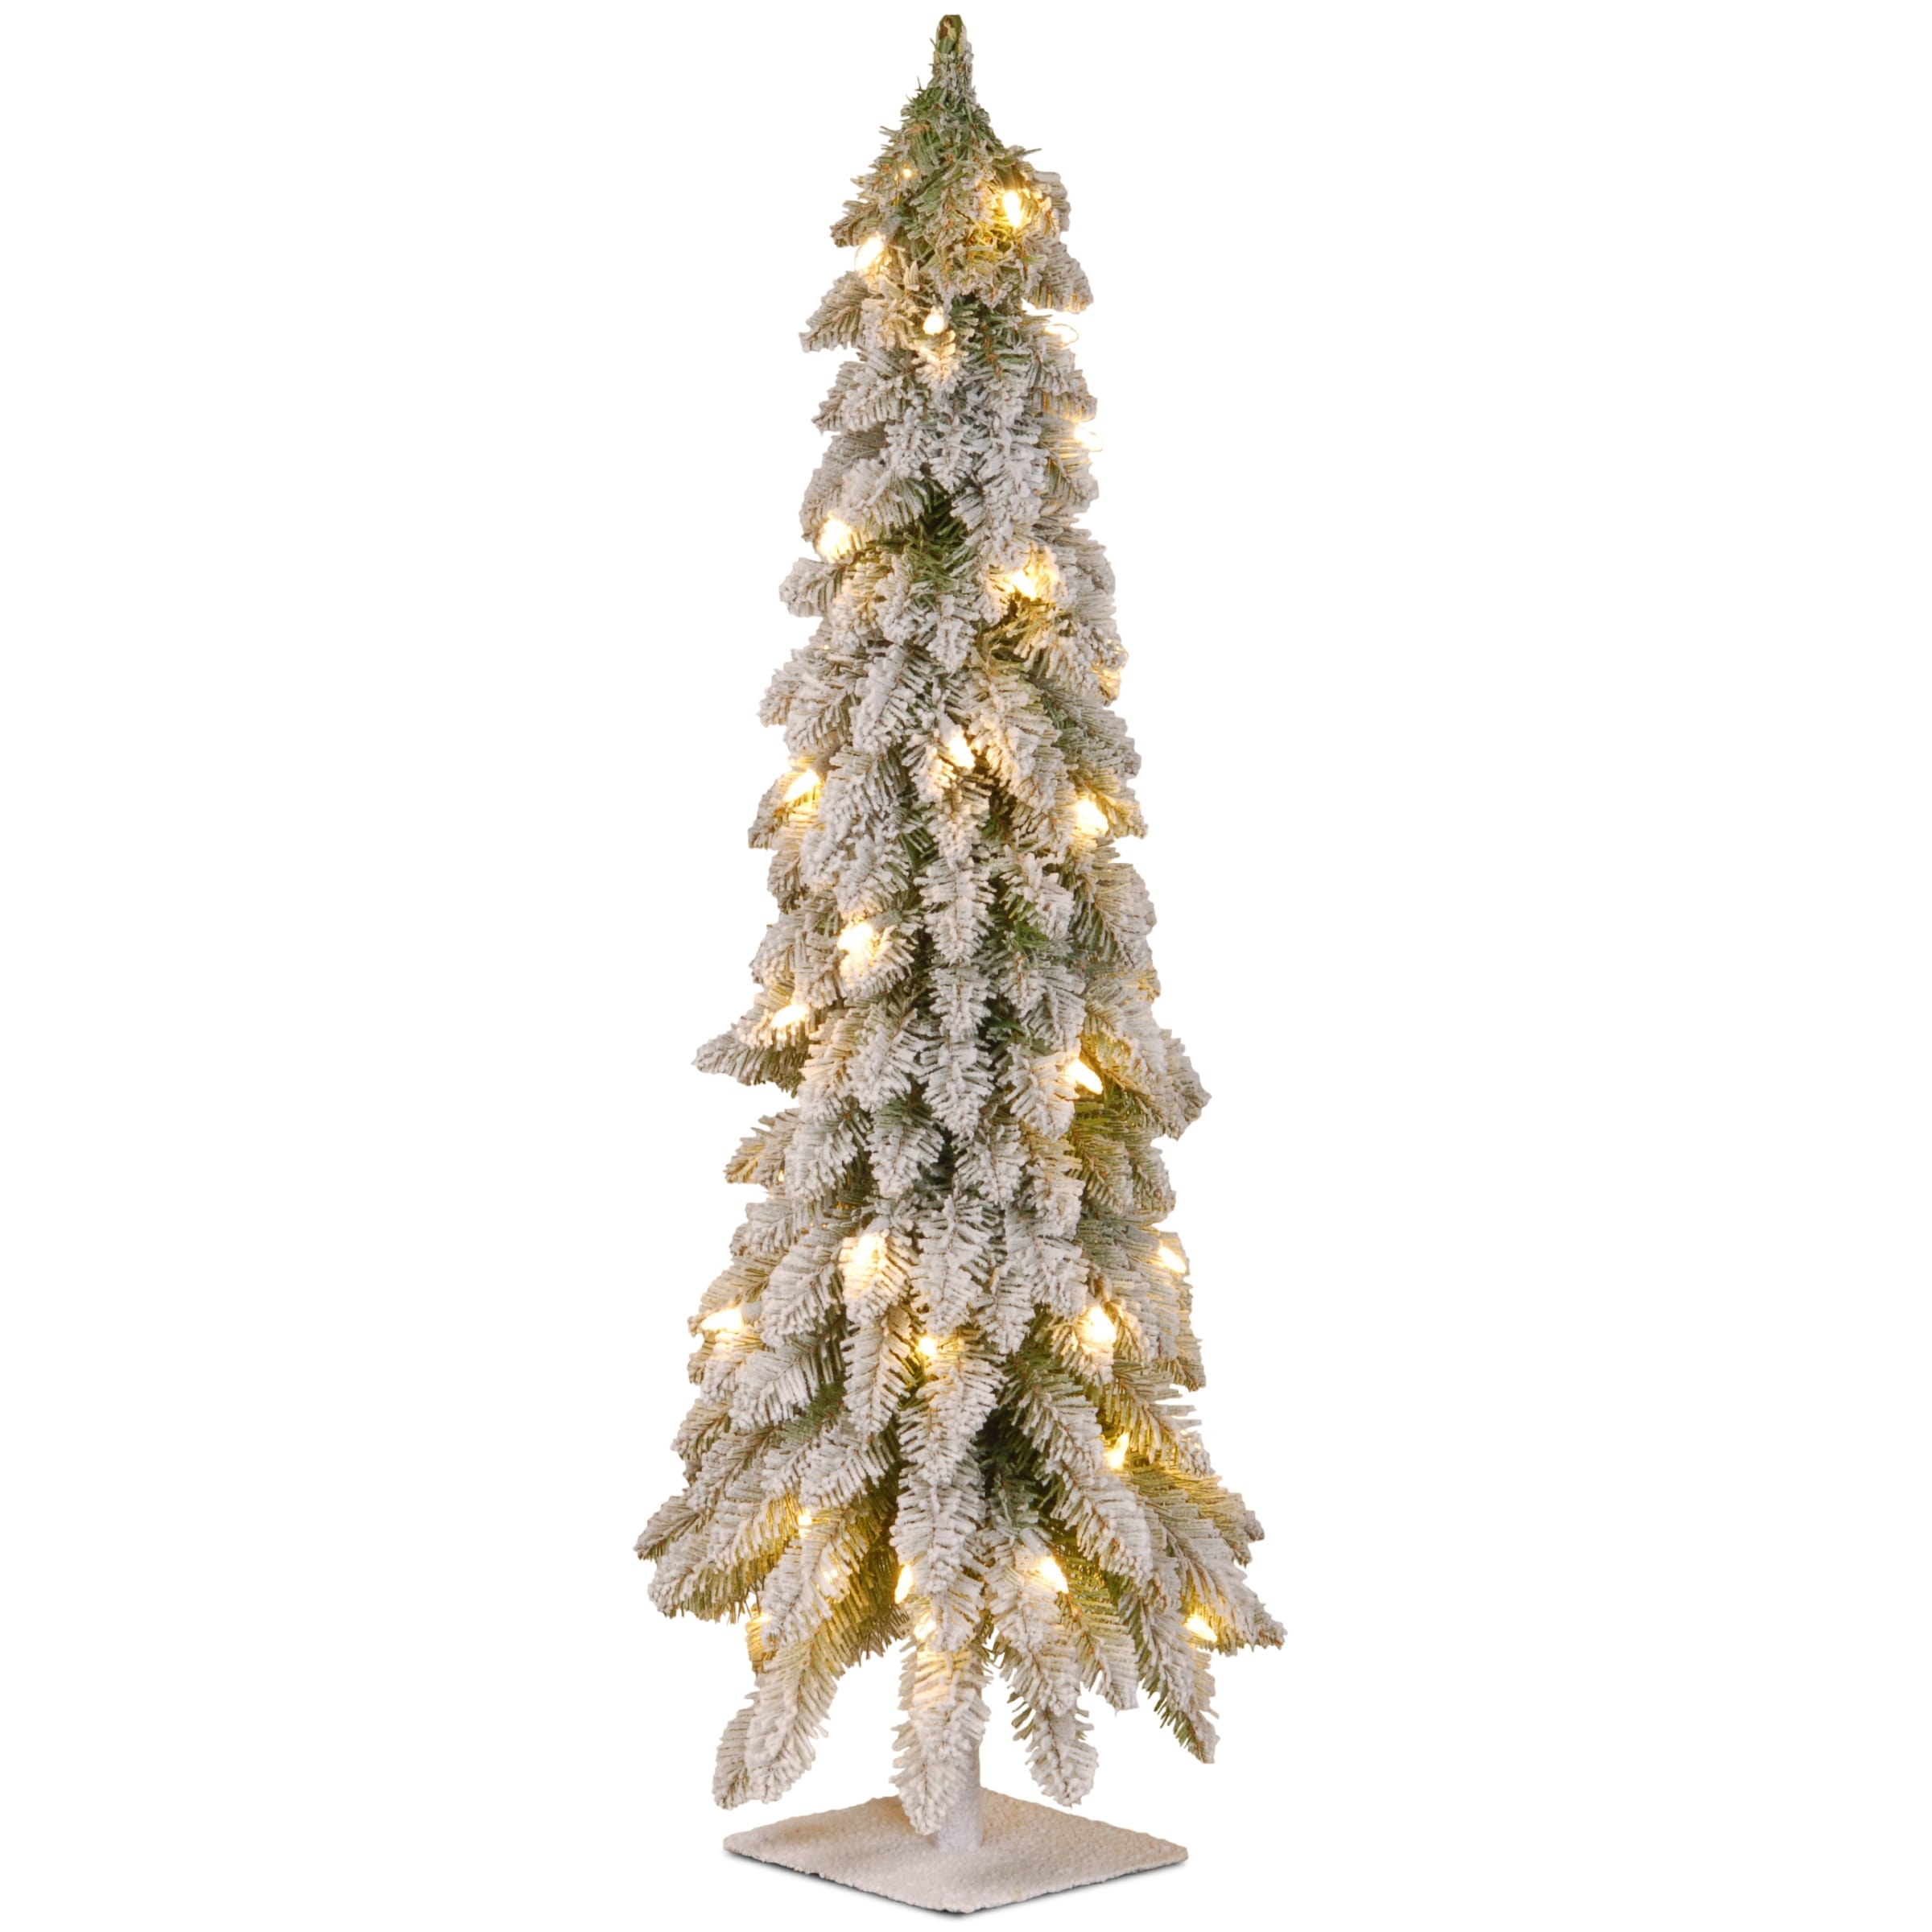 Green Pine Artificial Christmas Tree with Clear/White Lights